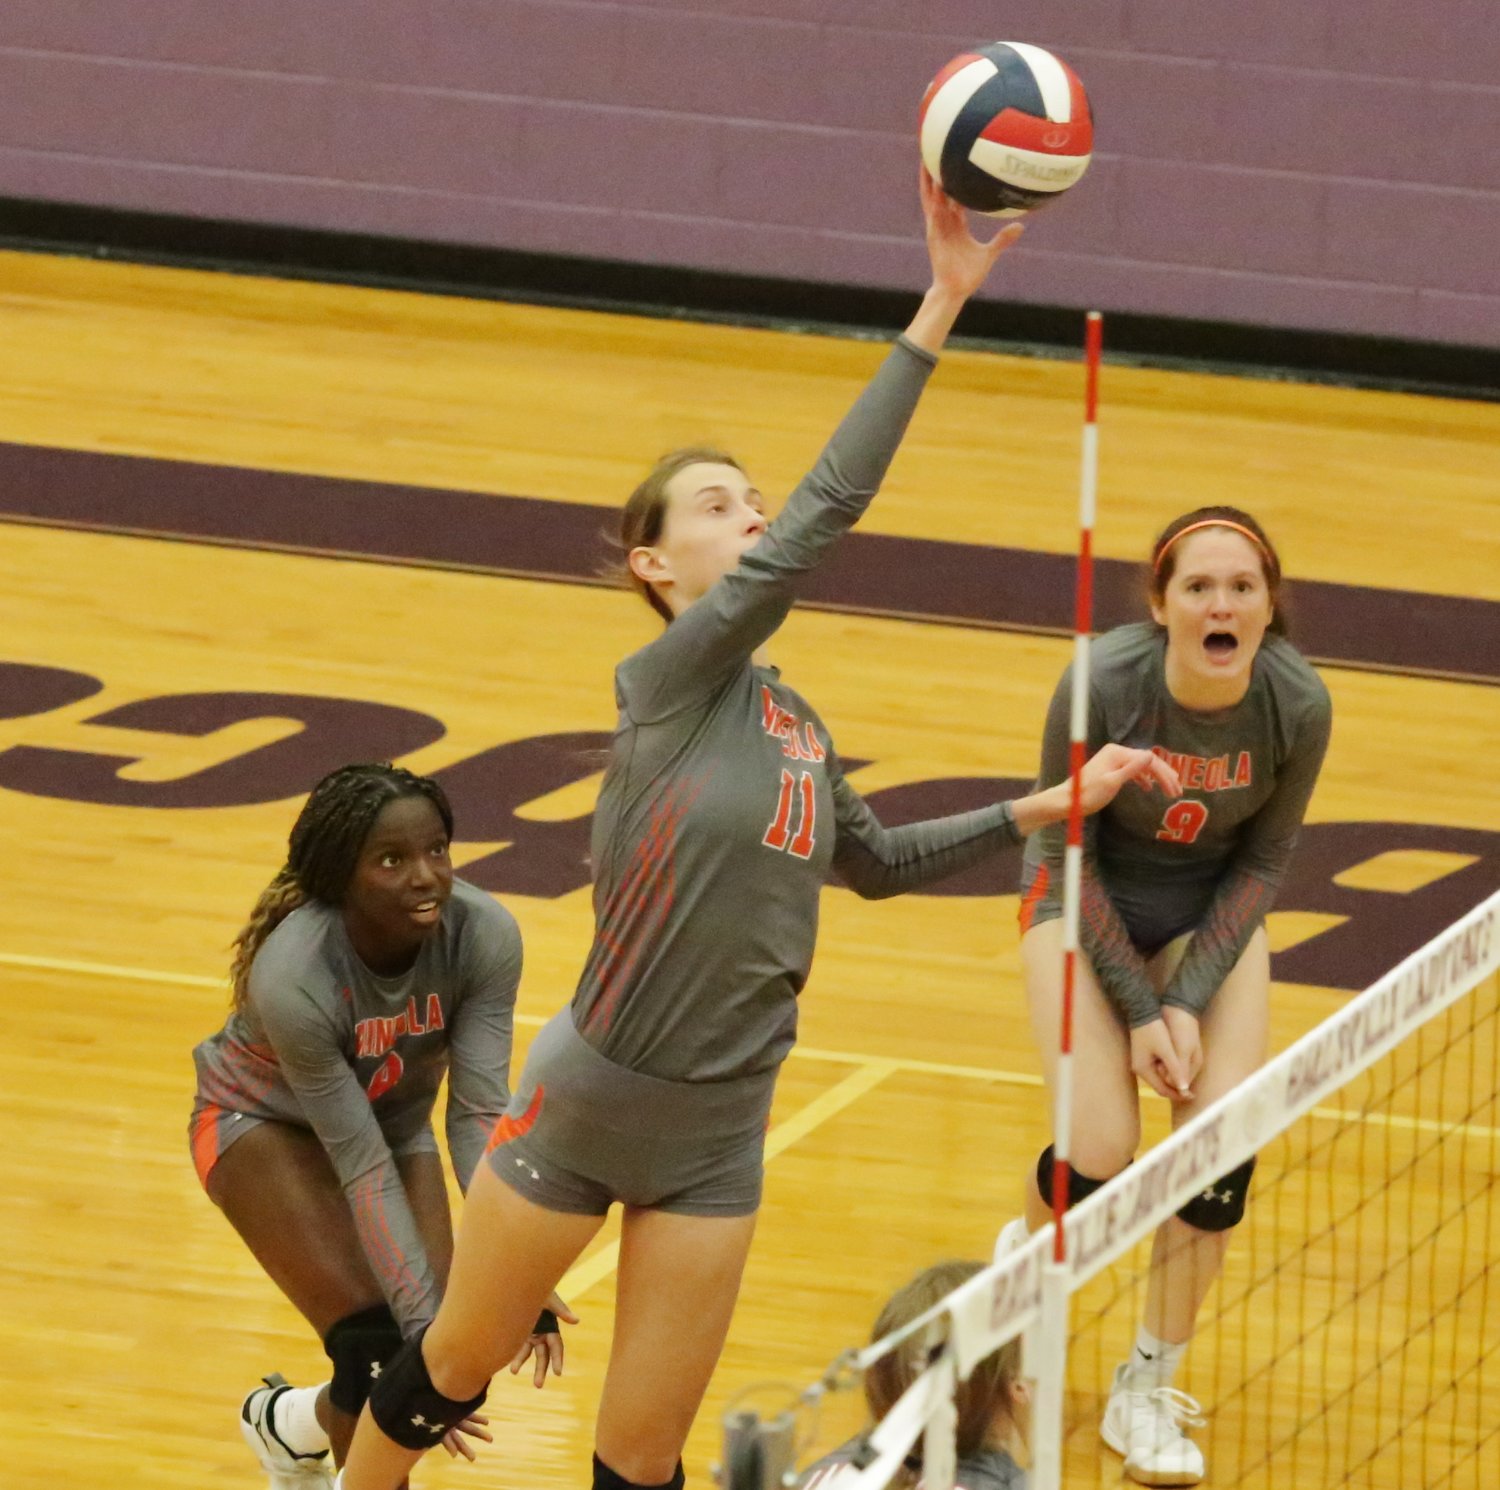 Shylah Kratzmeyer and Gracie Finley flank Olivia Hughes as she makes a play at the net.